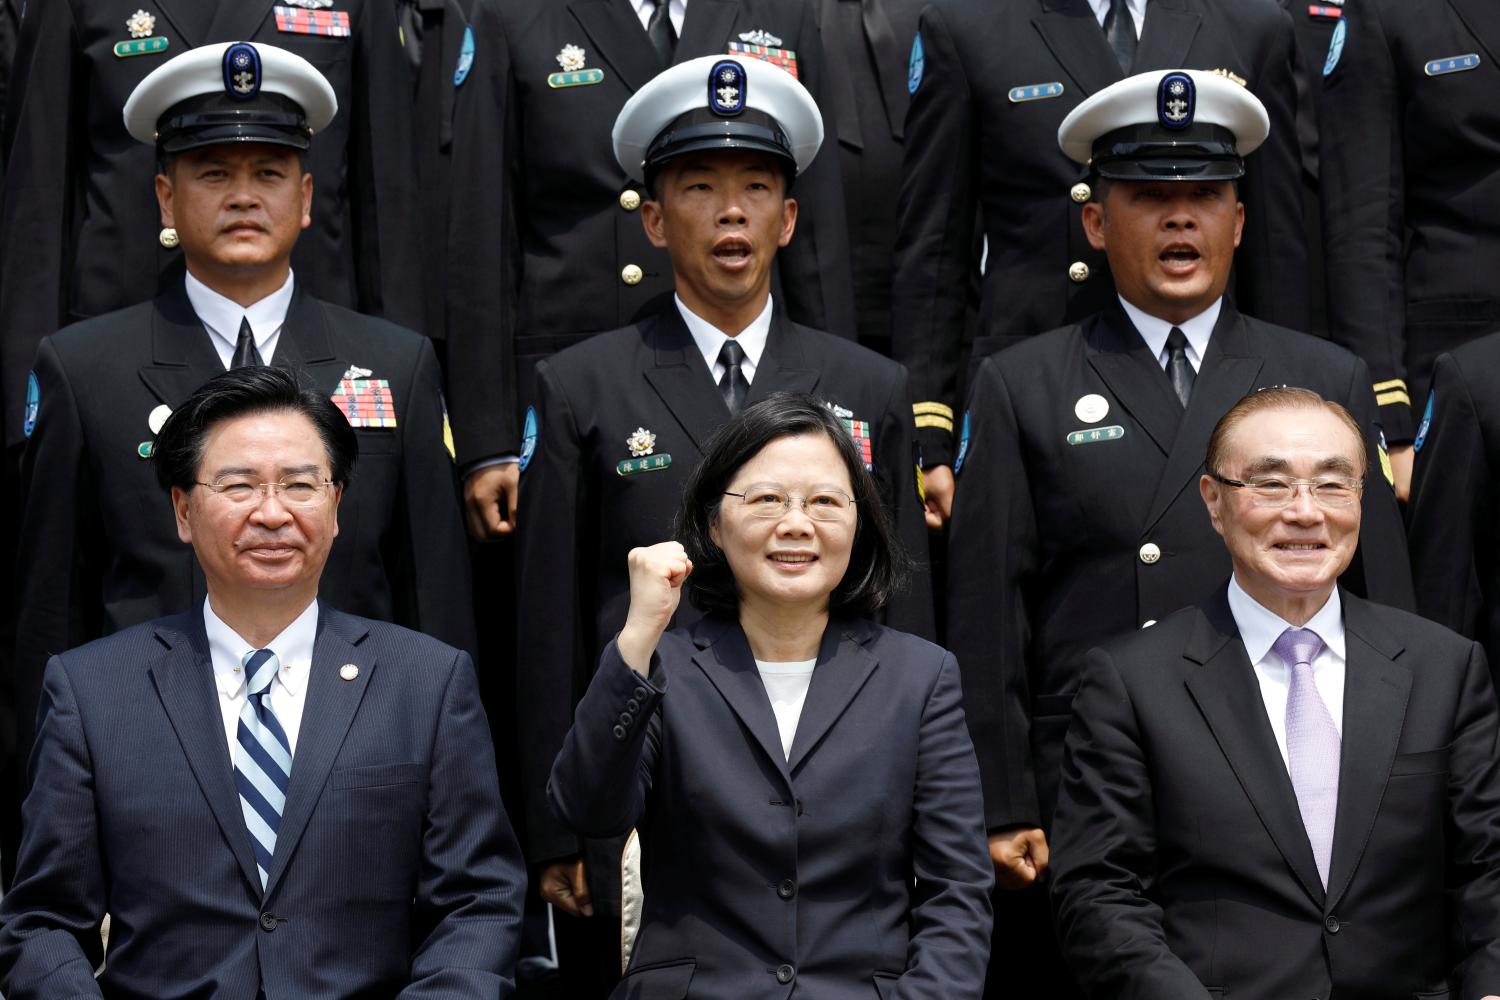 Taiwan President Tsai Ing-wen and Defence Minister Feng Shih-kuan (front row R) react as they take a group photo with navy personnel after visiting a navy base in Kaohsiung, Taiwan